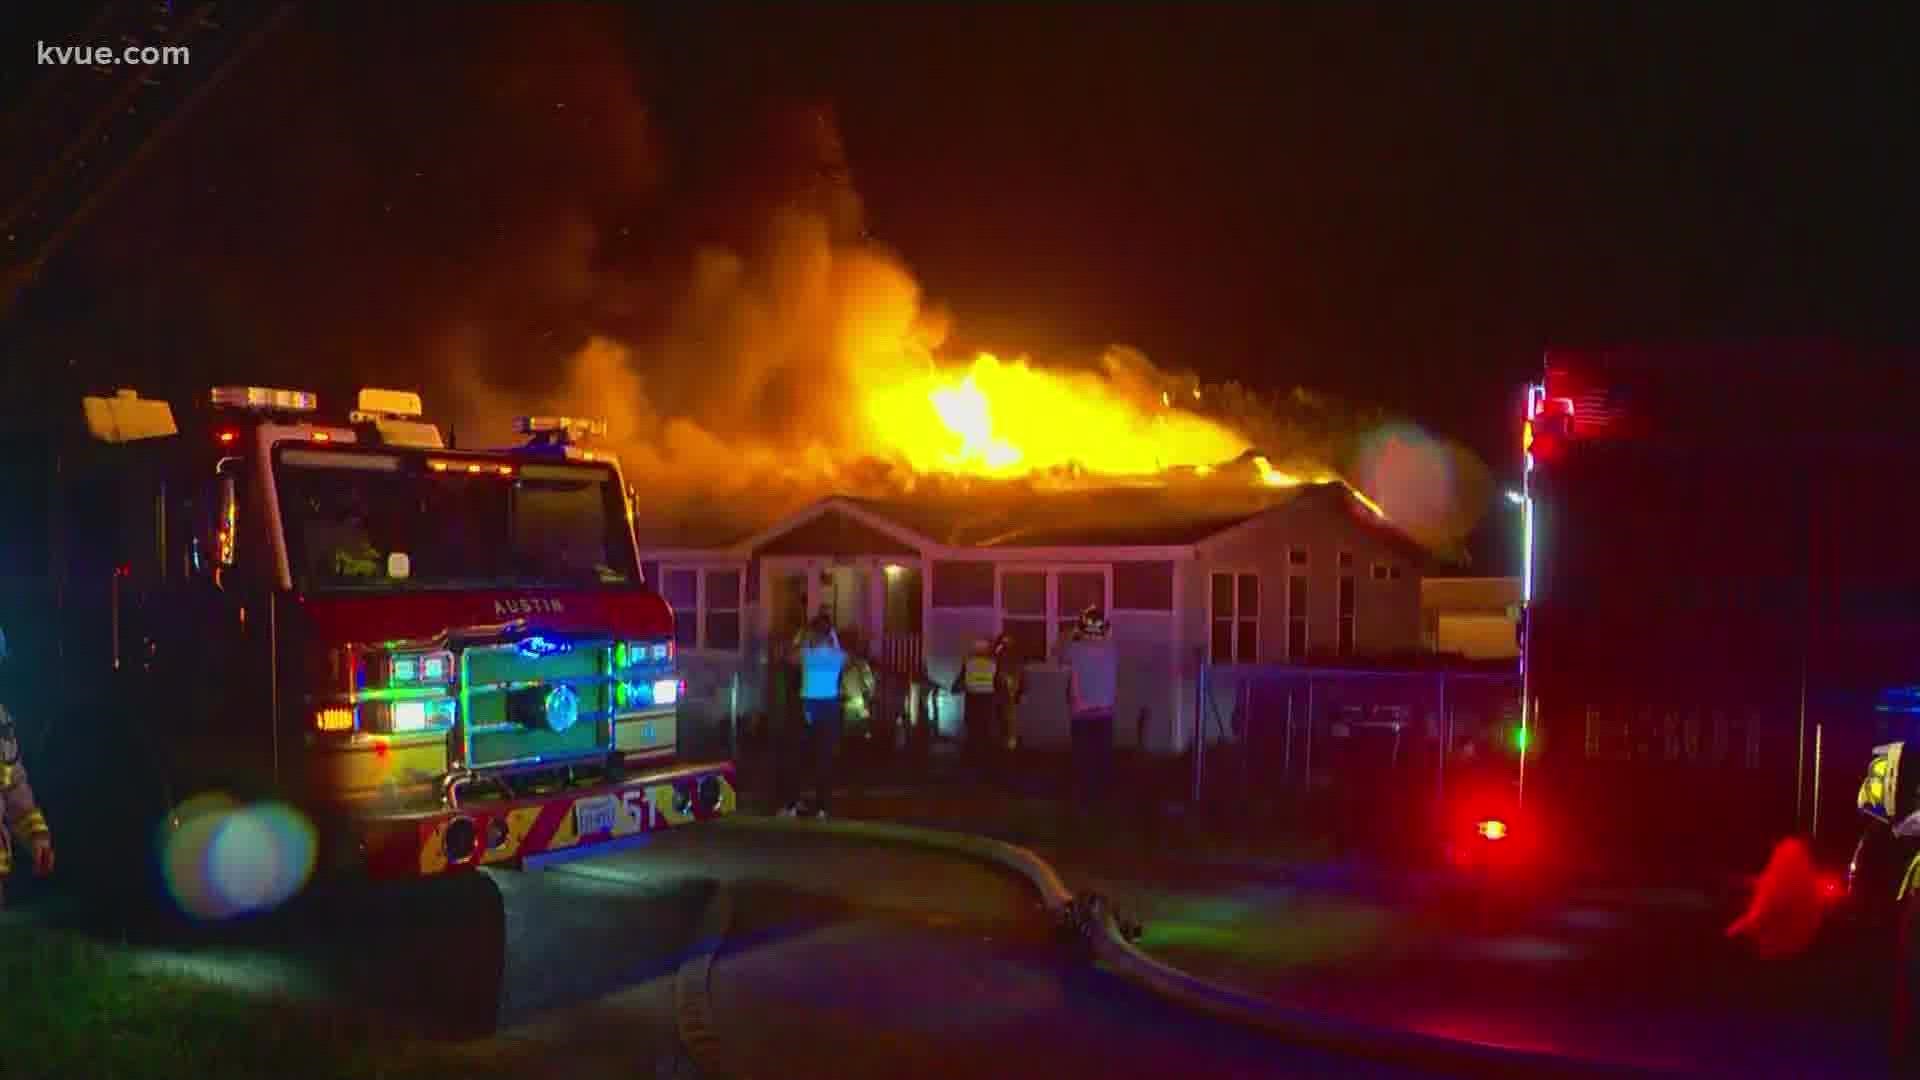 Austin firefighters helped put out an early morning fire that nearly fully-engulfed an Oak Hill home on Thursday.